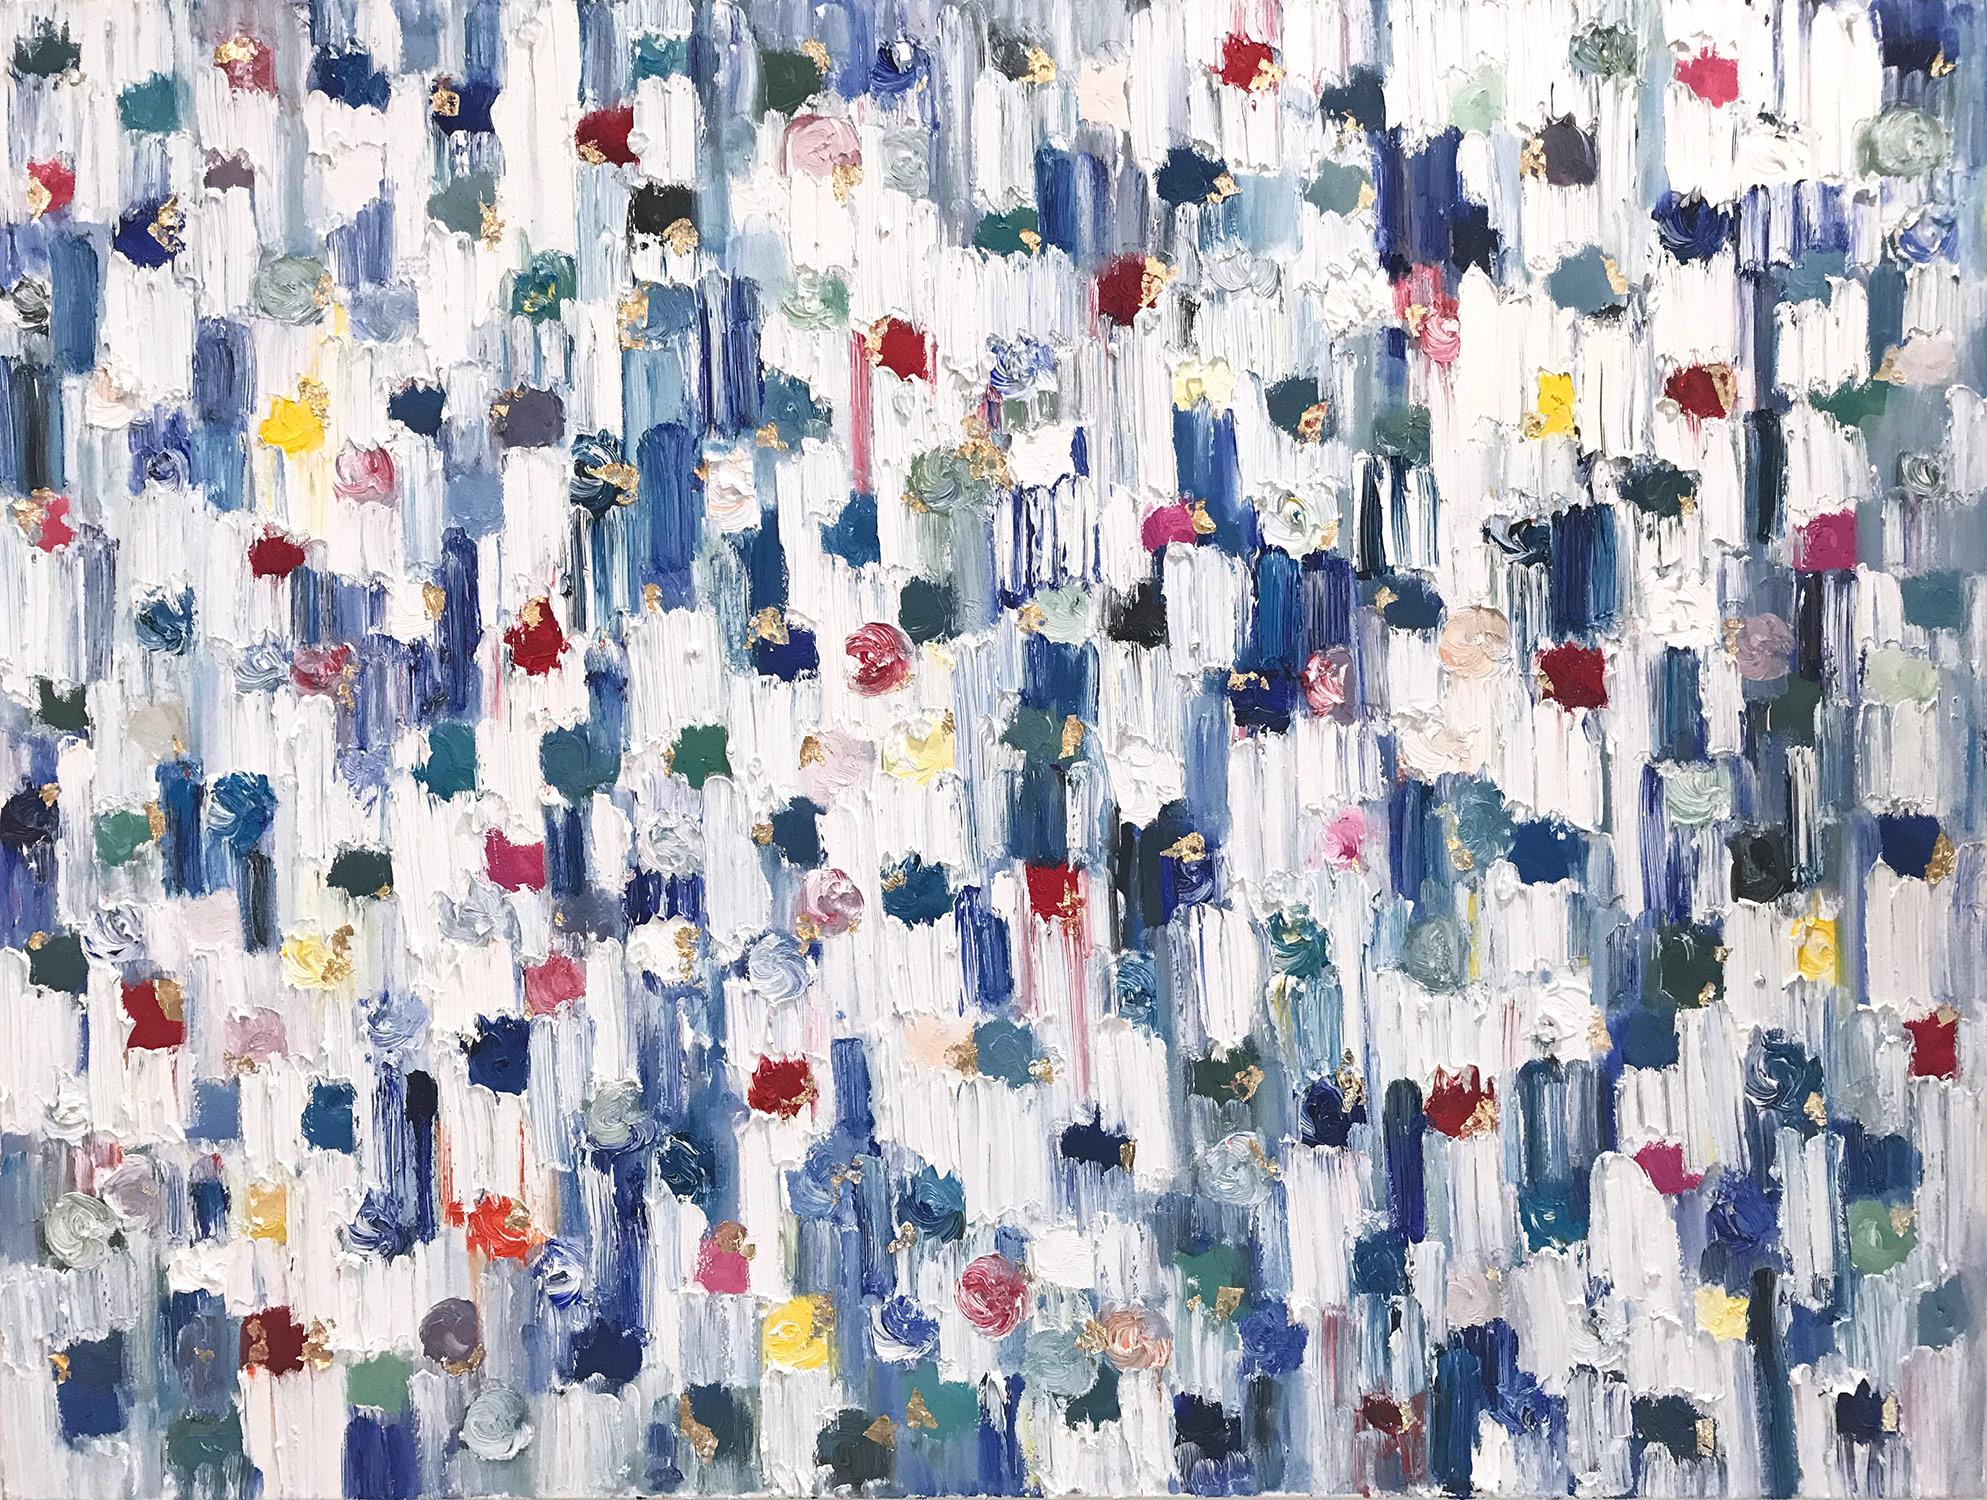 Cindy Shaoul Abstract Painting - "Dripping Dots - Cannes" Colorful Abstract Oil Painting on Canvas